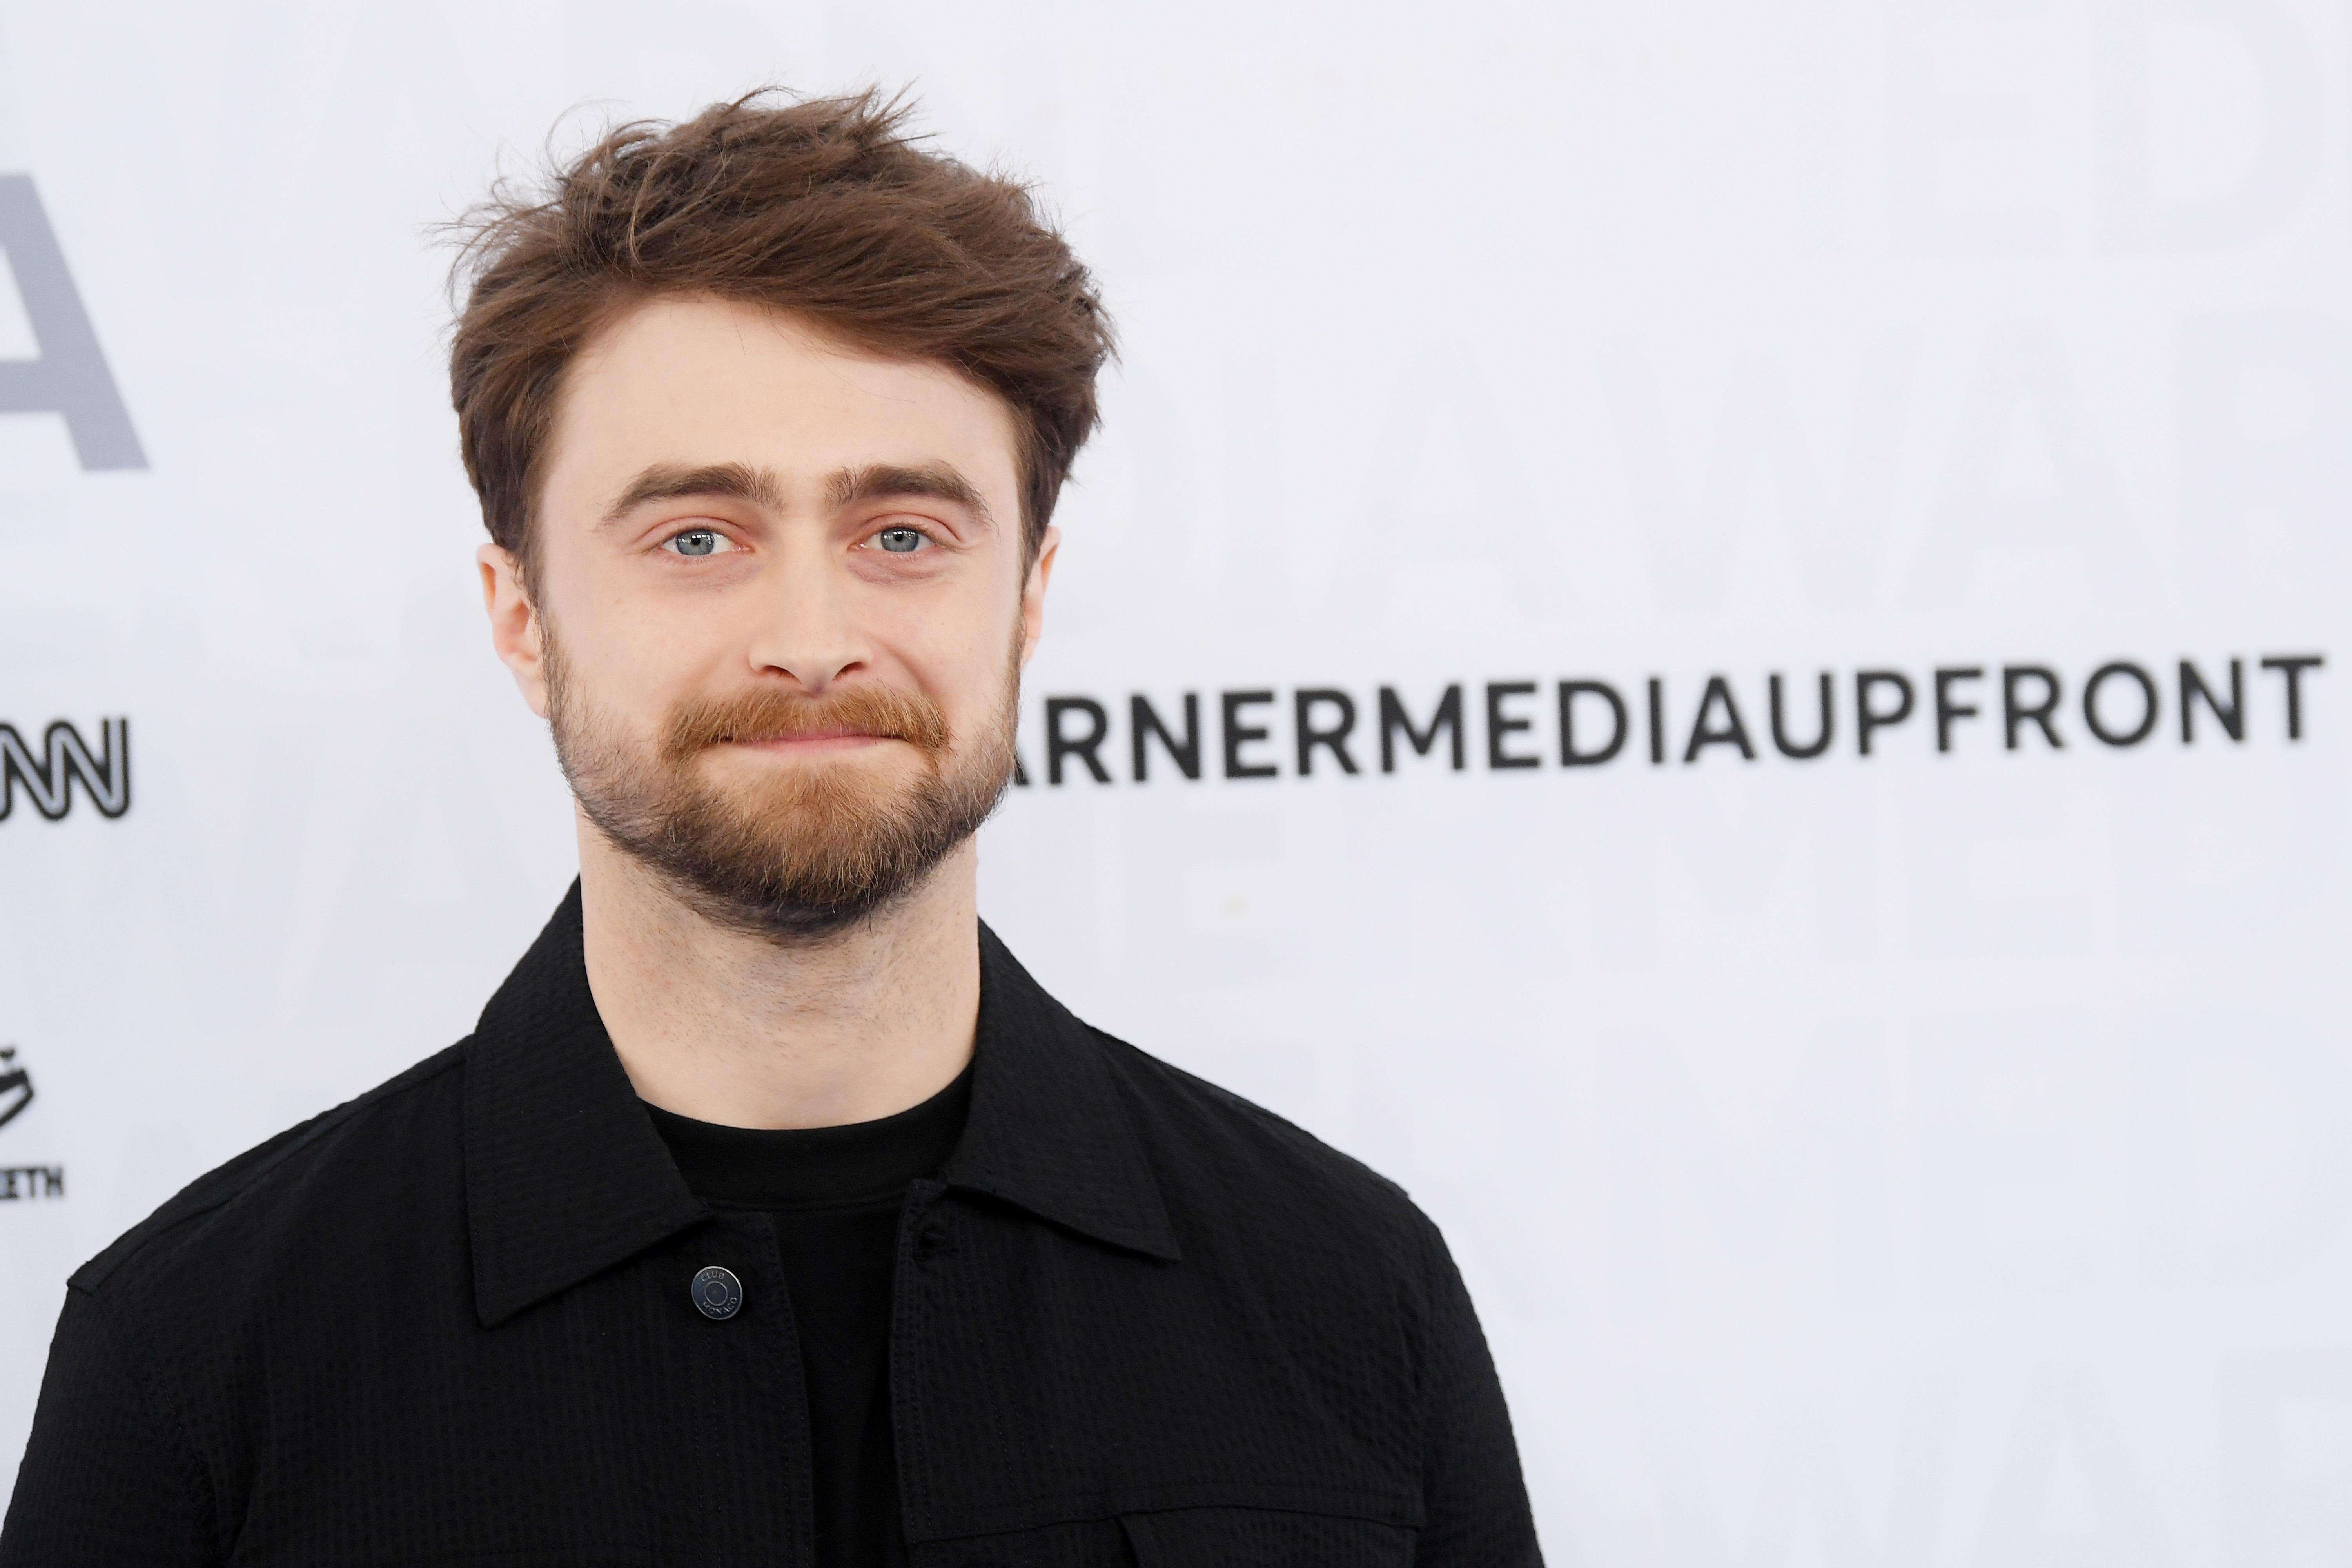 Daniel Radcliffe Doesn't Have the Coronavirus – Why He's Trending